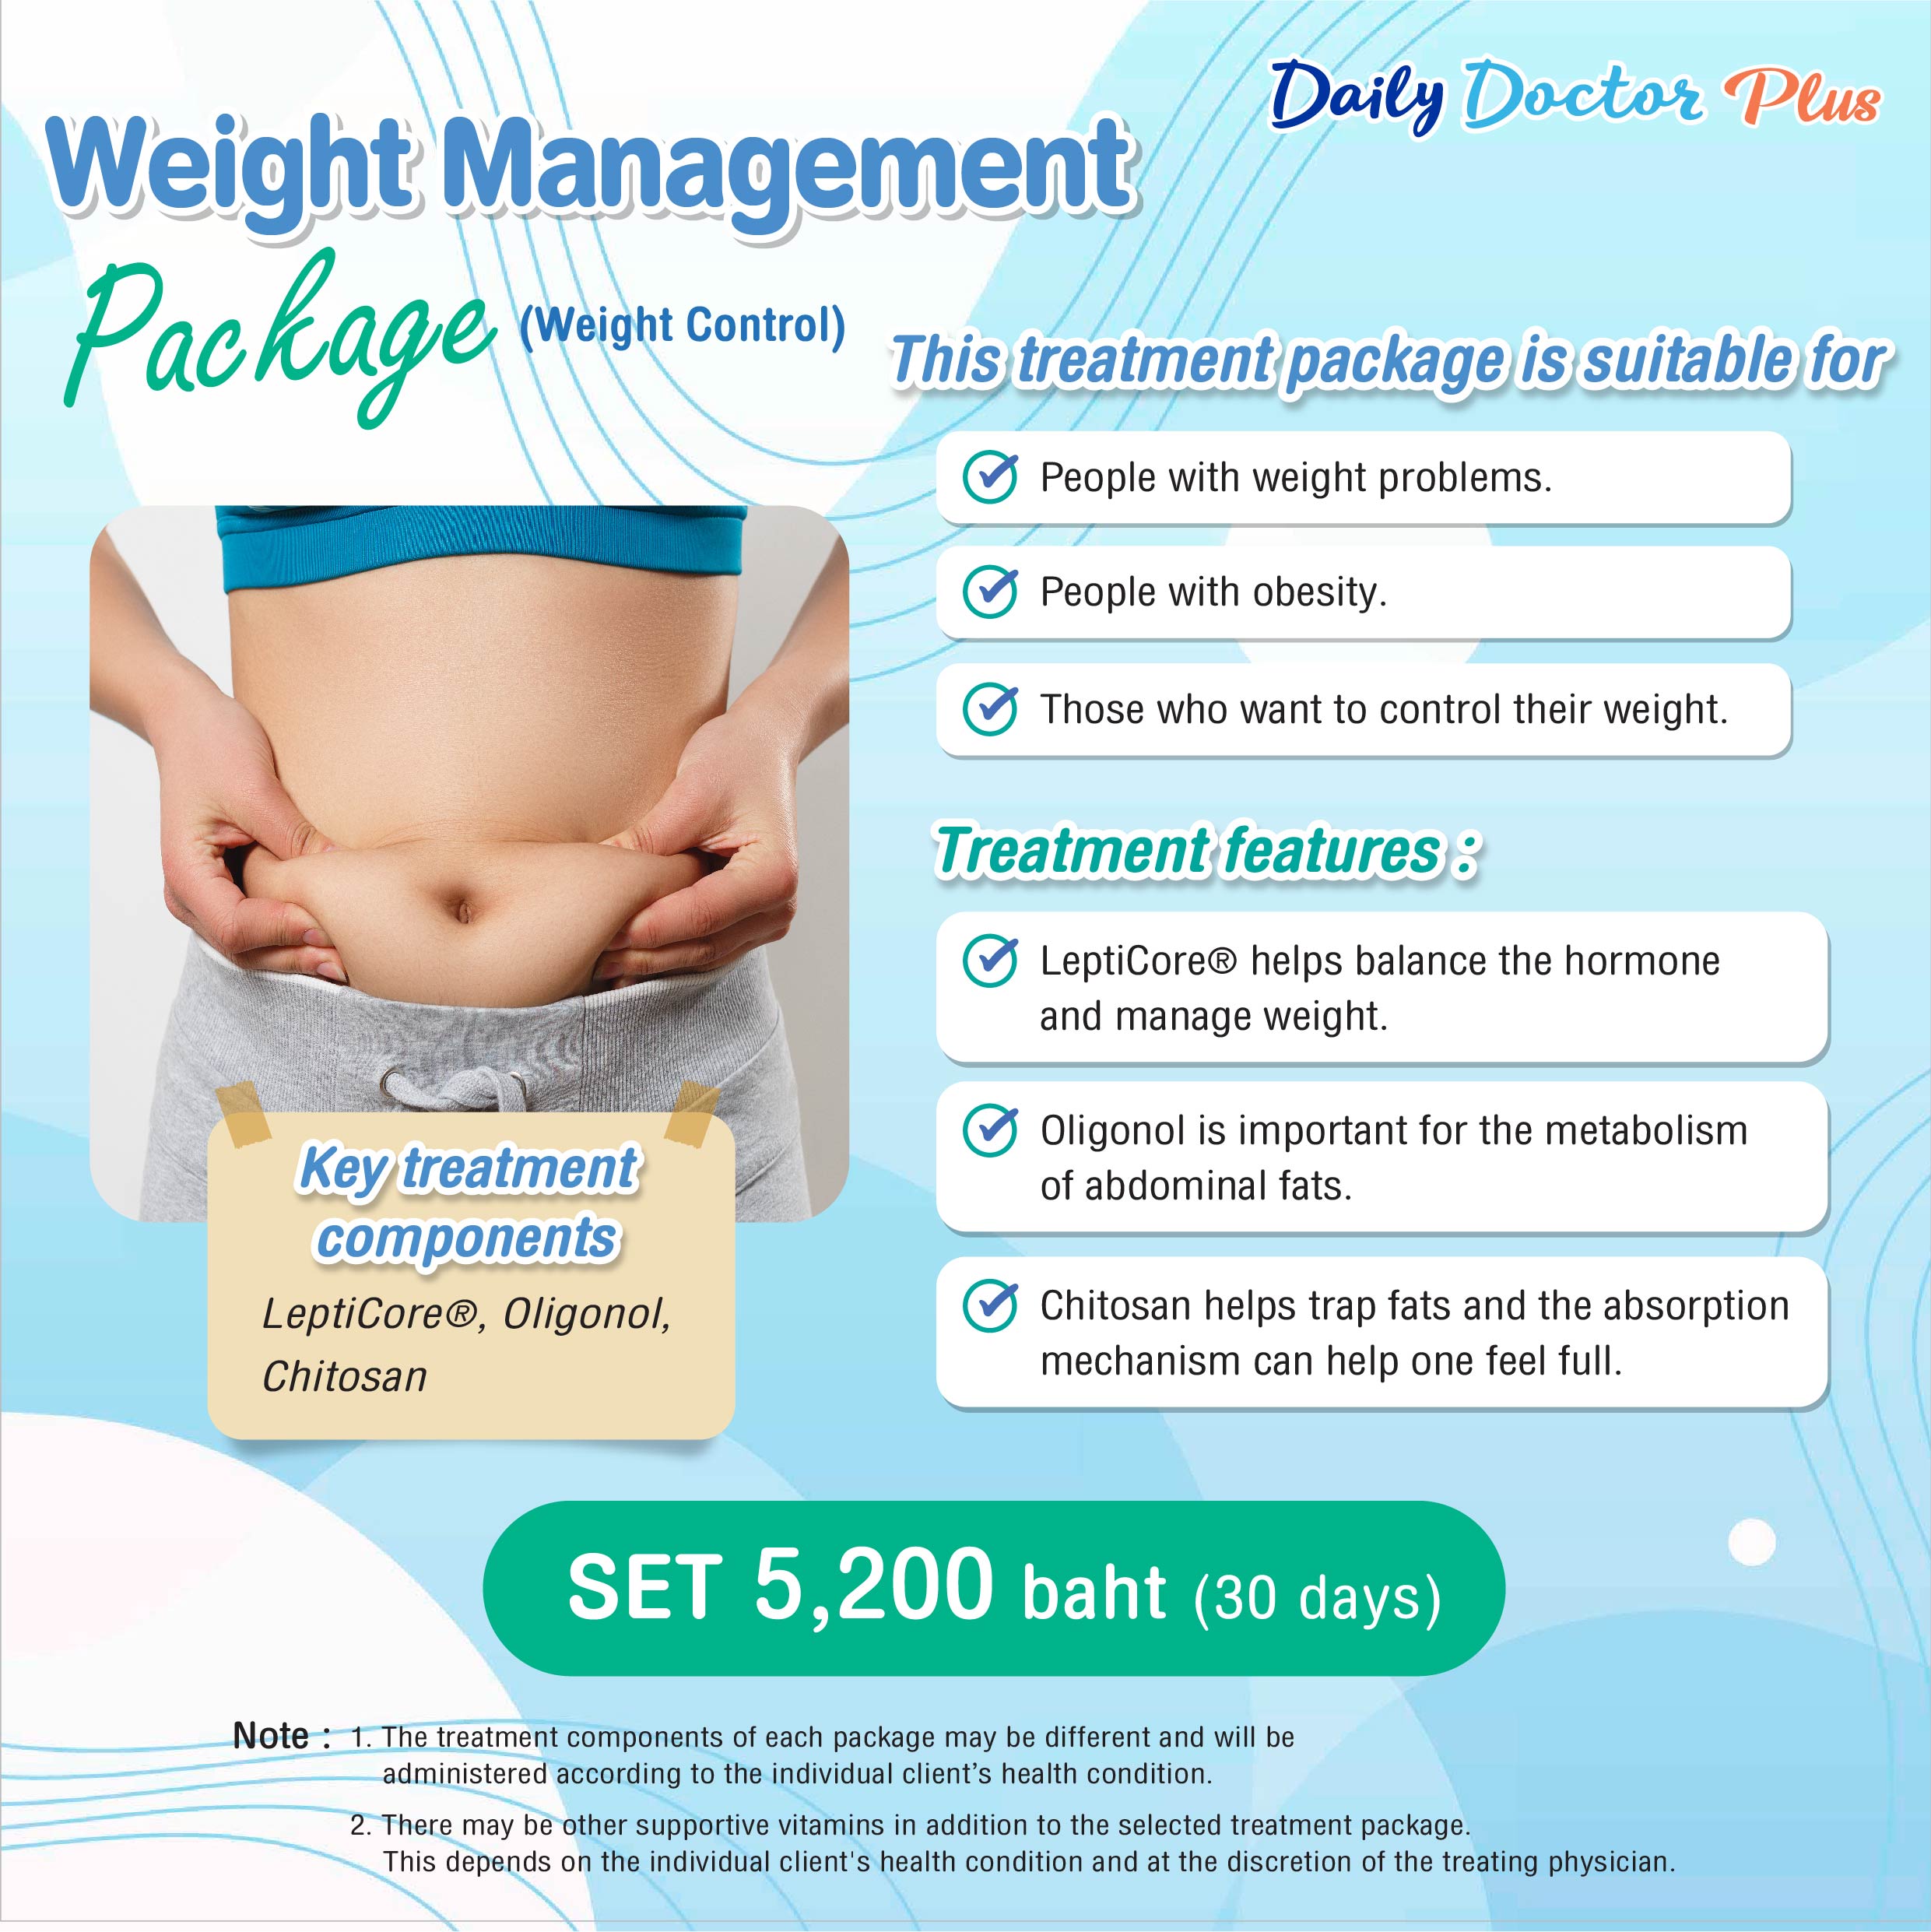 Daily Doctor Plus : Weight Management